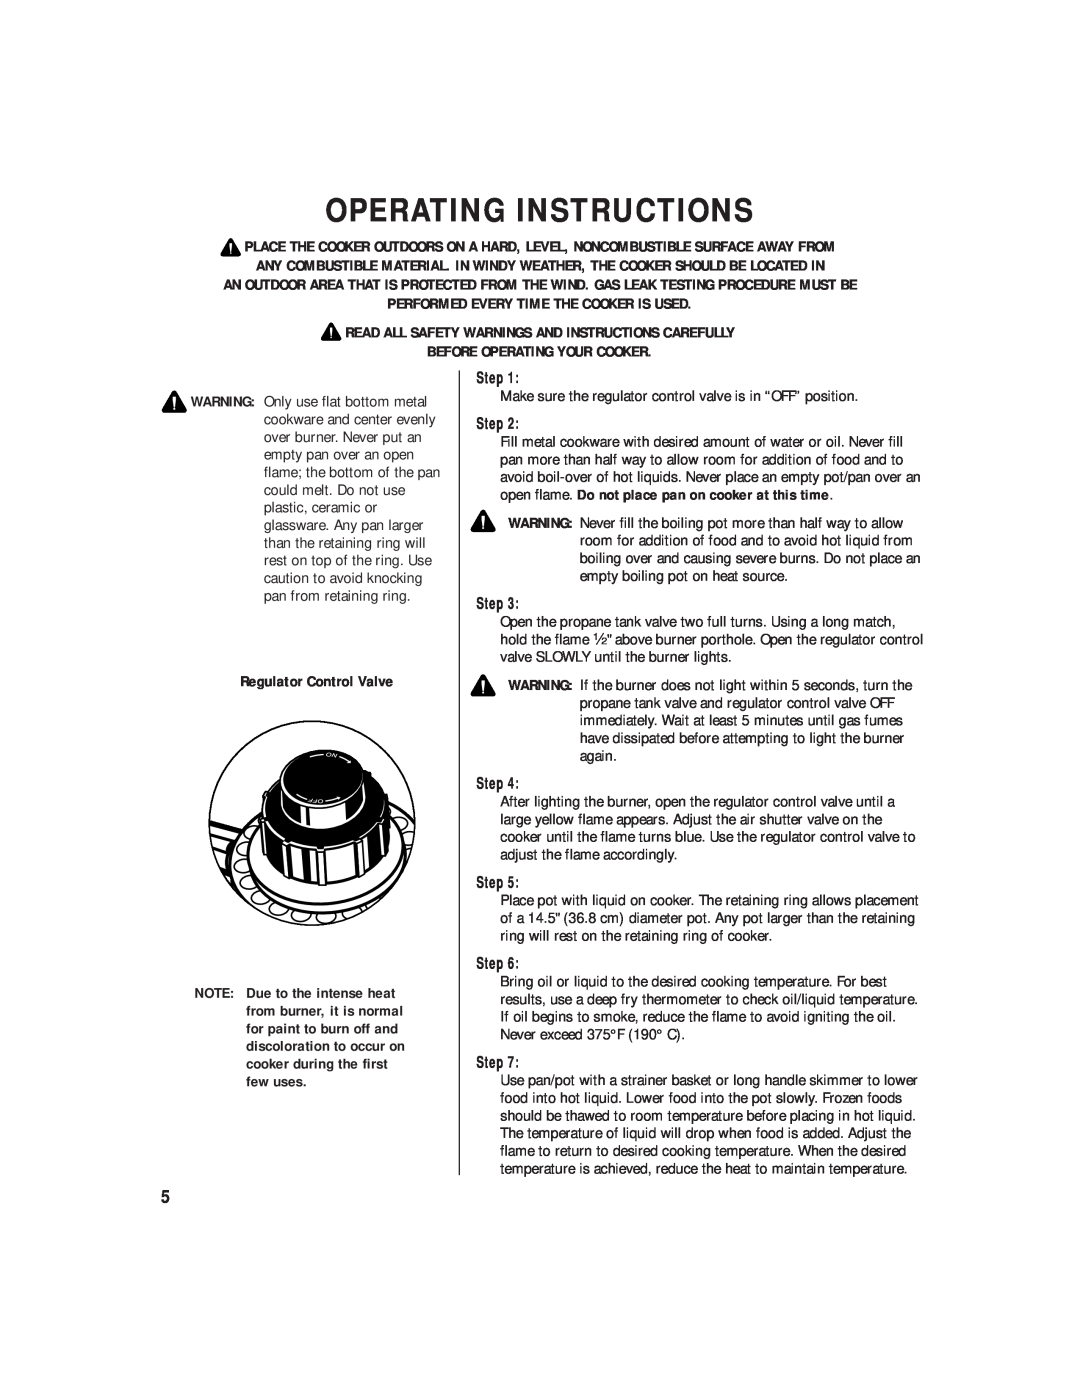 Brinkmann 815-3880-0 Operating Instructions, Performed Every Time The Cooker Is Used, Before Operating Your Cooker, Step 